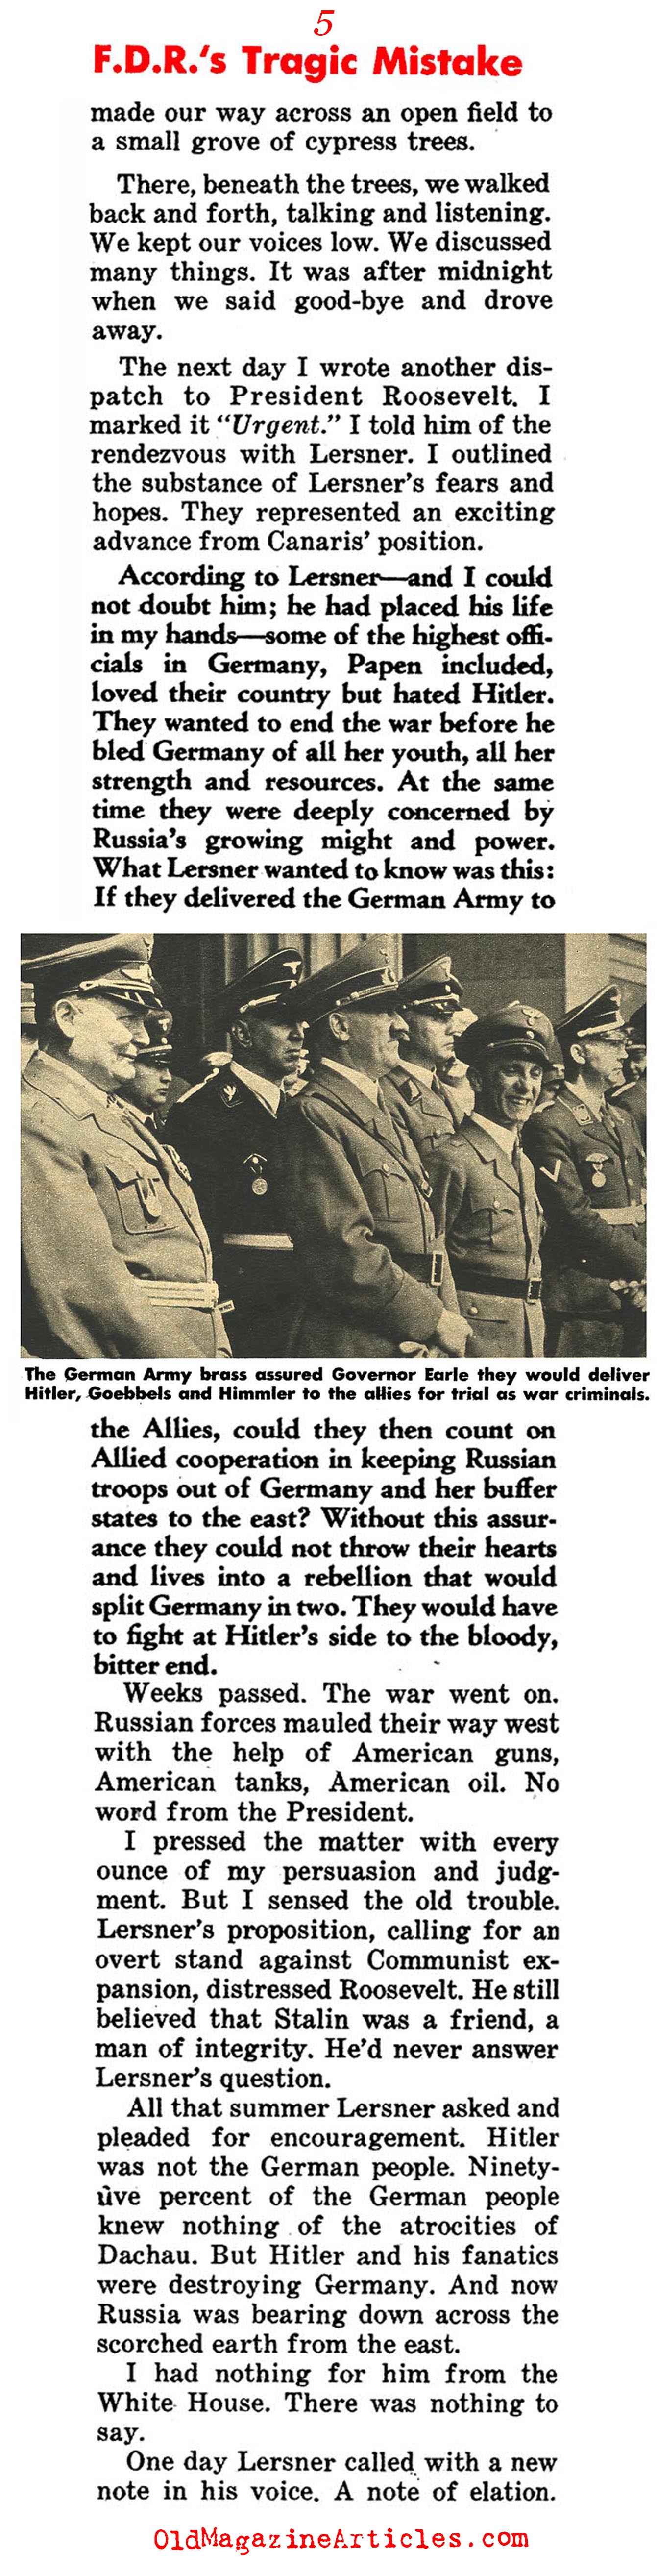 The Germans Tried to Secure a Peace (Confidential Magazine, 1958)